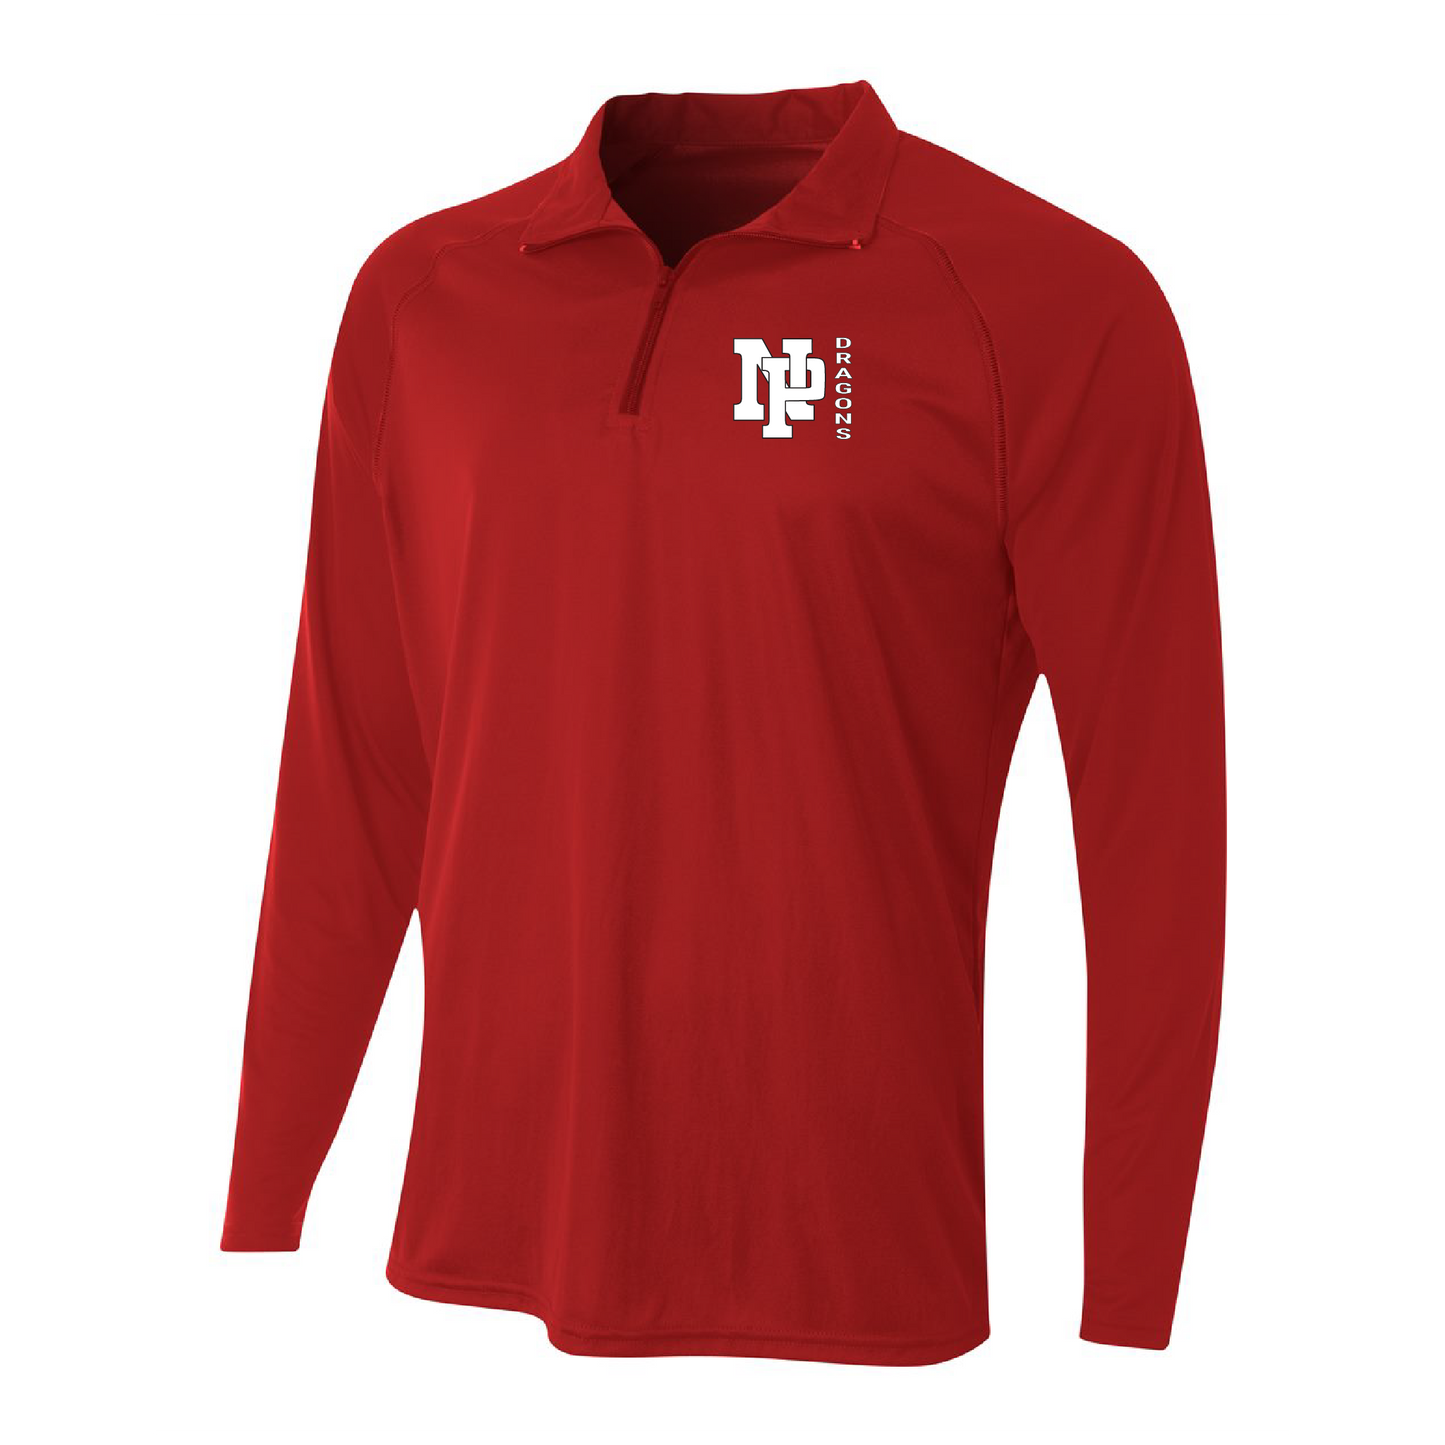 Mens Quarter Zip Pullover - White NP DRAGONS, side by side